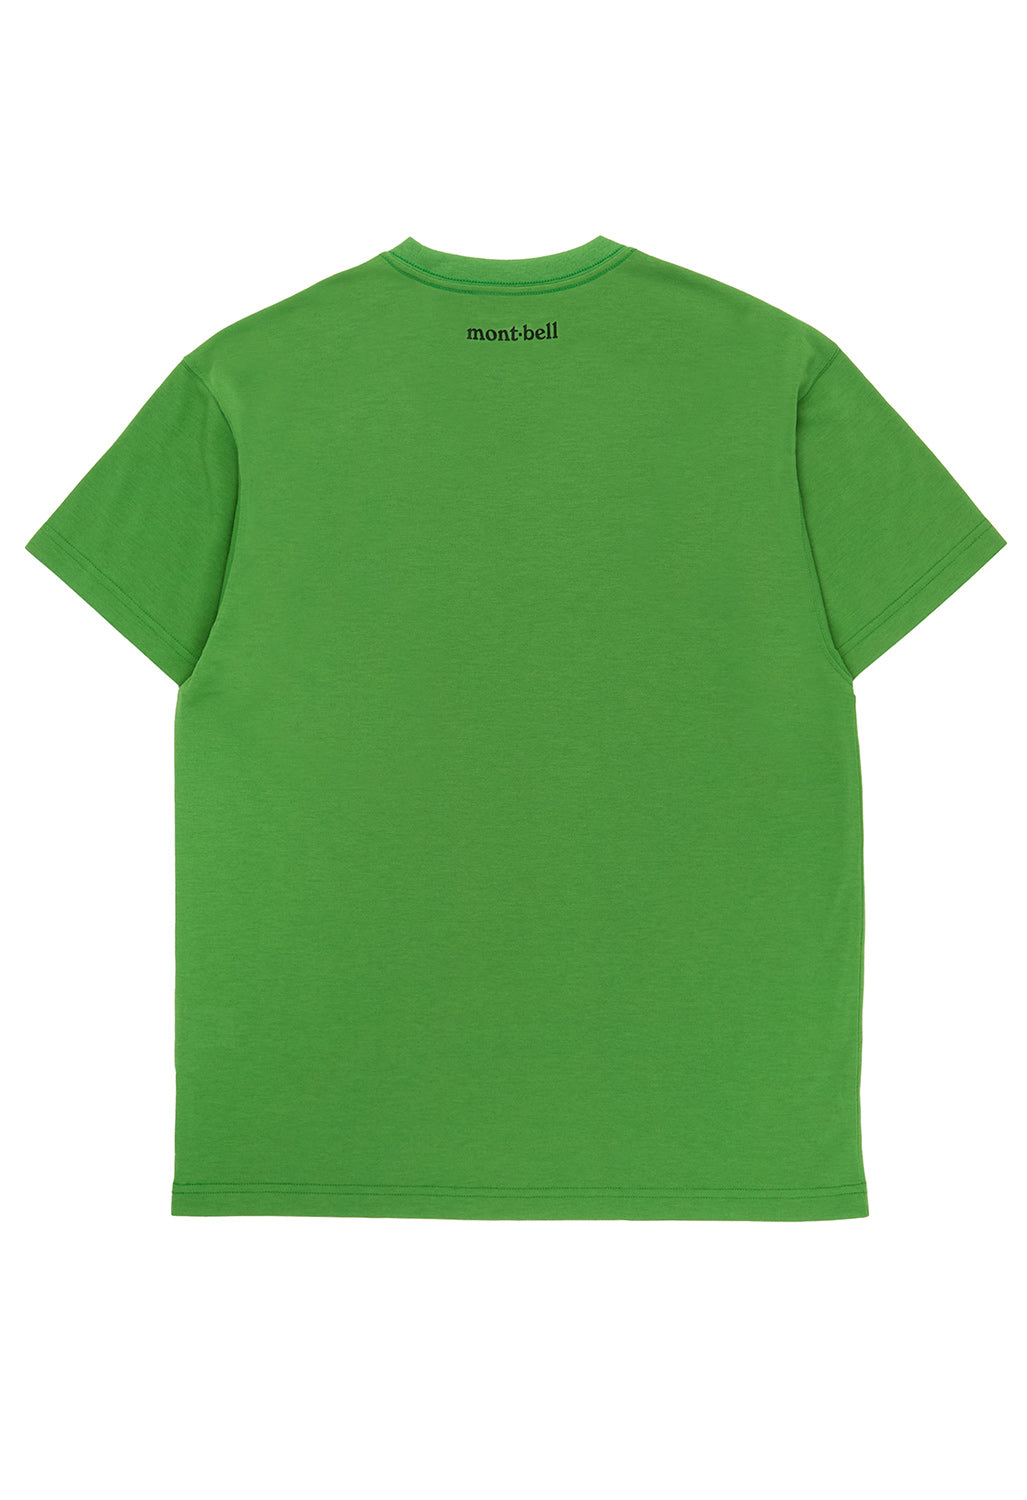 Montbell Men's Wickron Mountain T-Shirt - Green